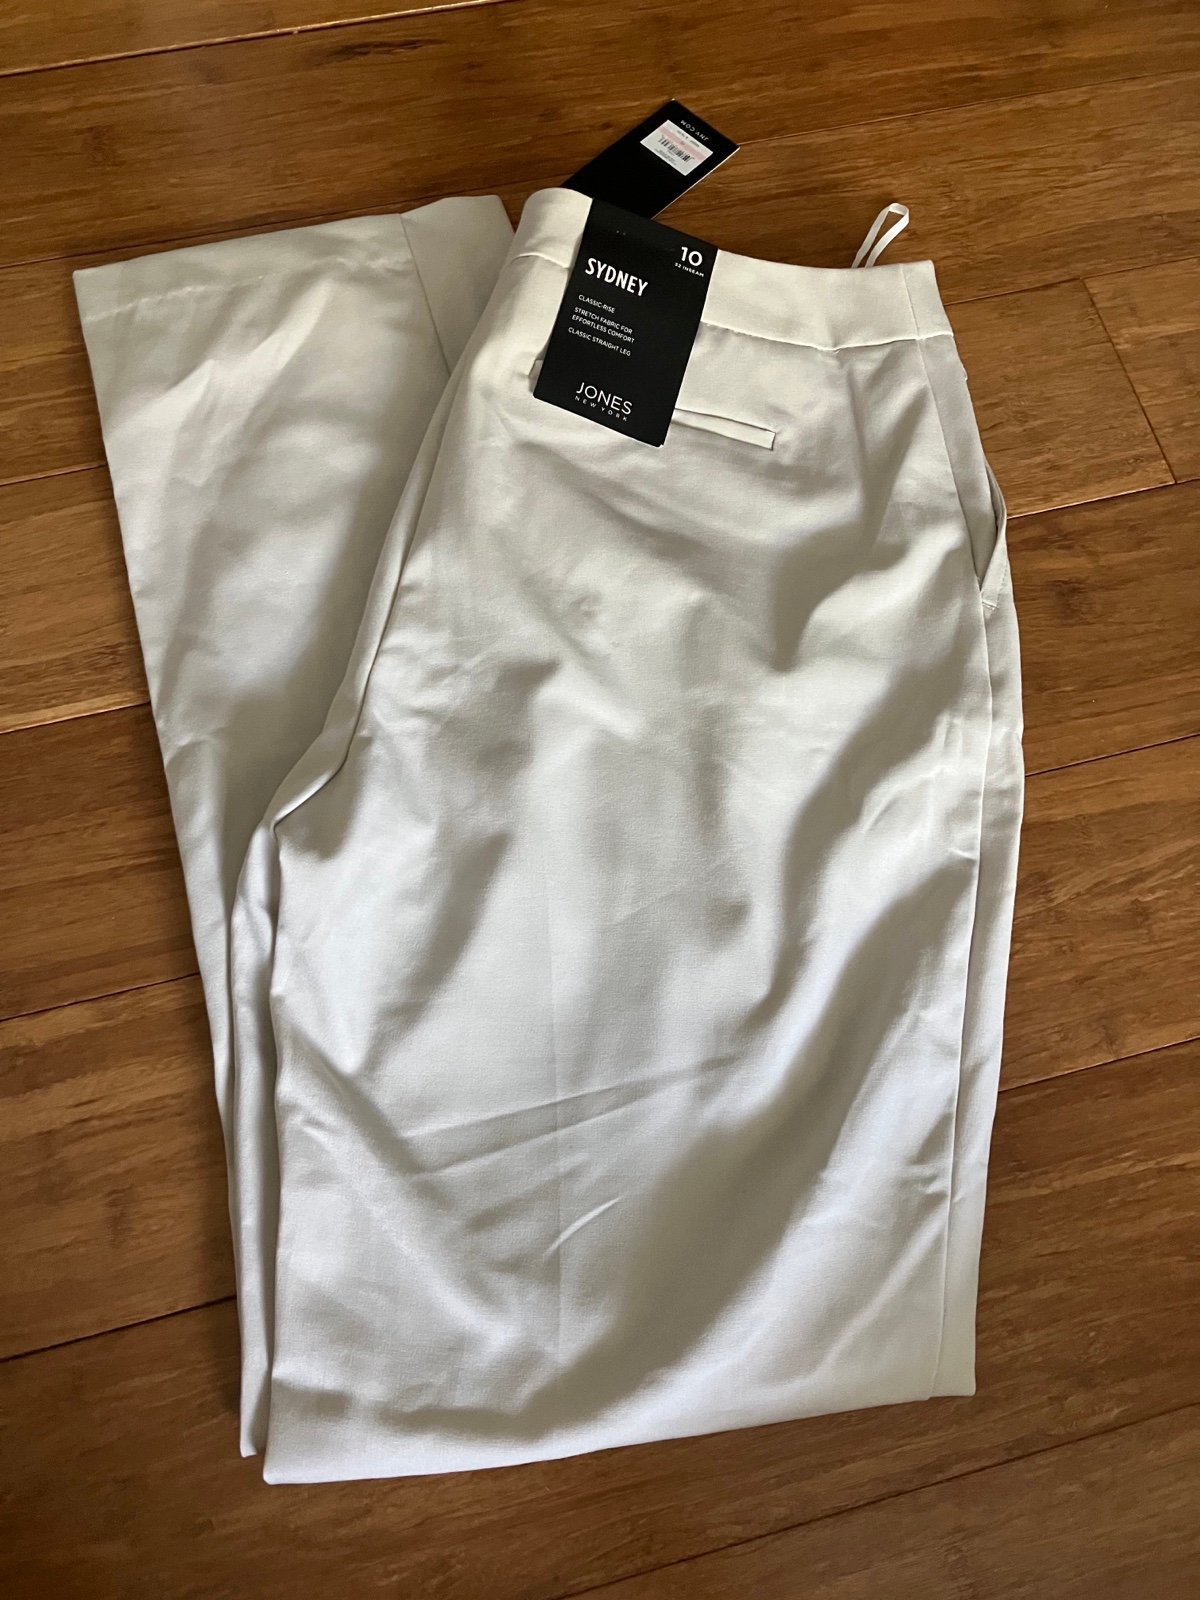 cheapest place to buy  Nwt Jones New York dress pants n